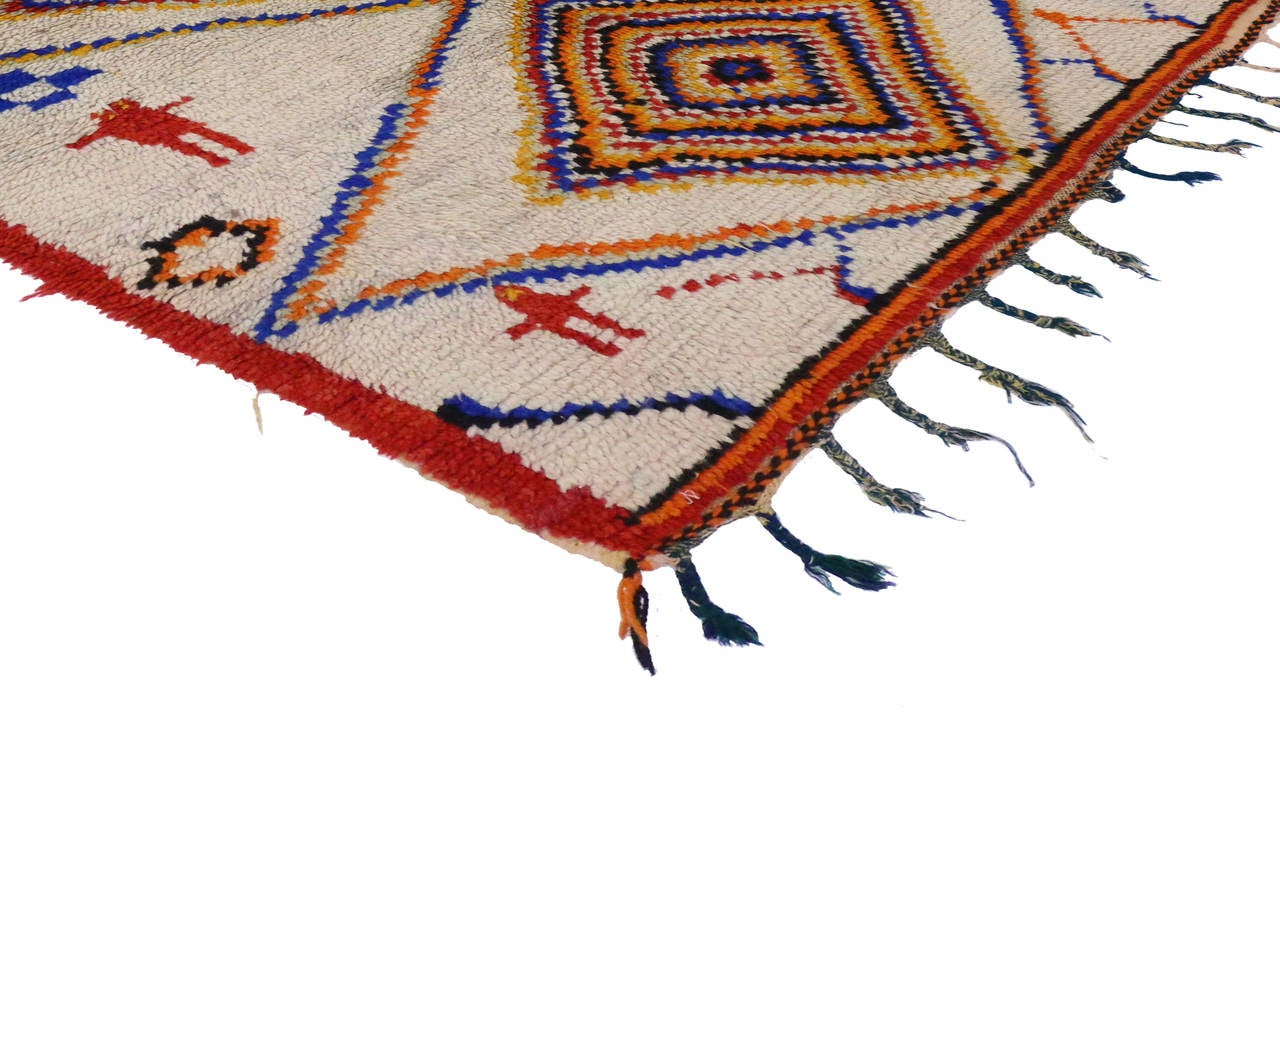 20th Century Mid-Century Modern Style Berber Moroccan Rug with Tribal Design